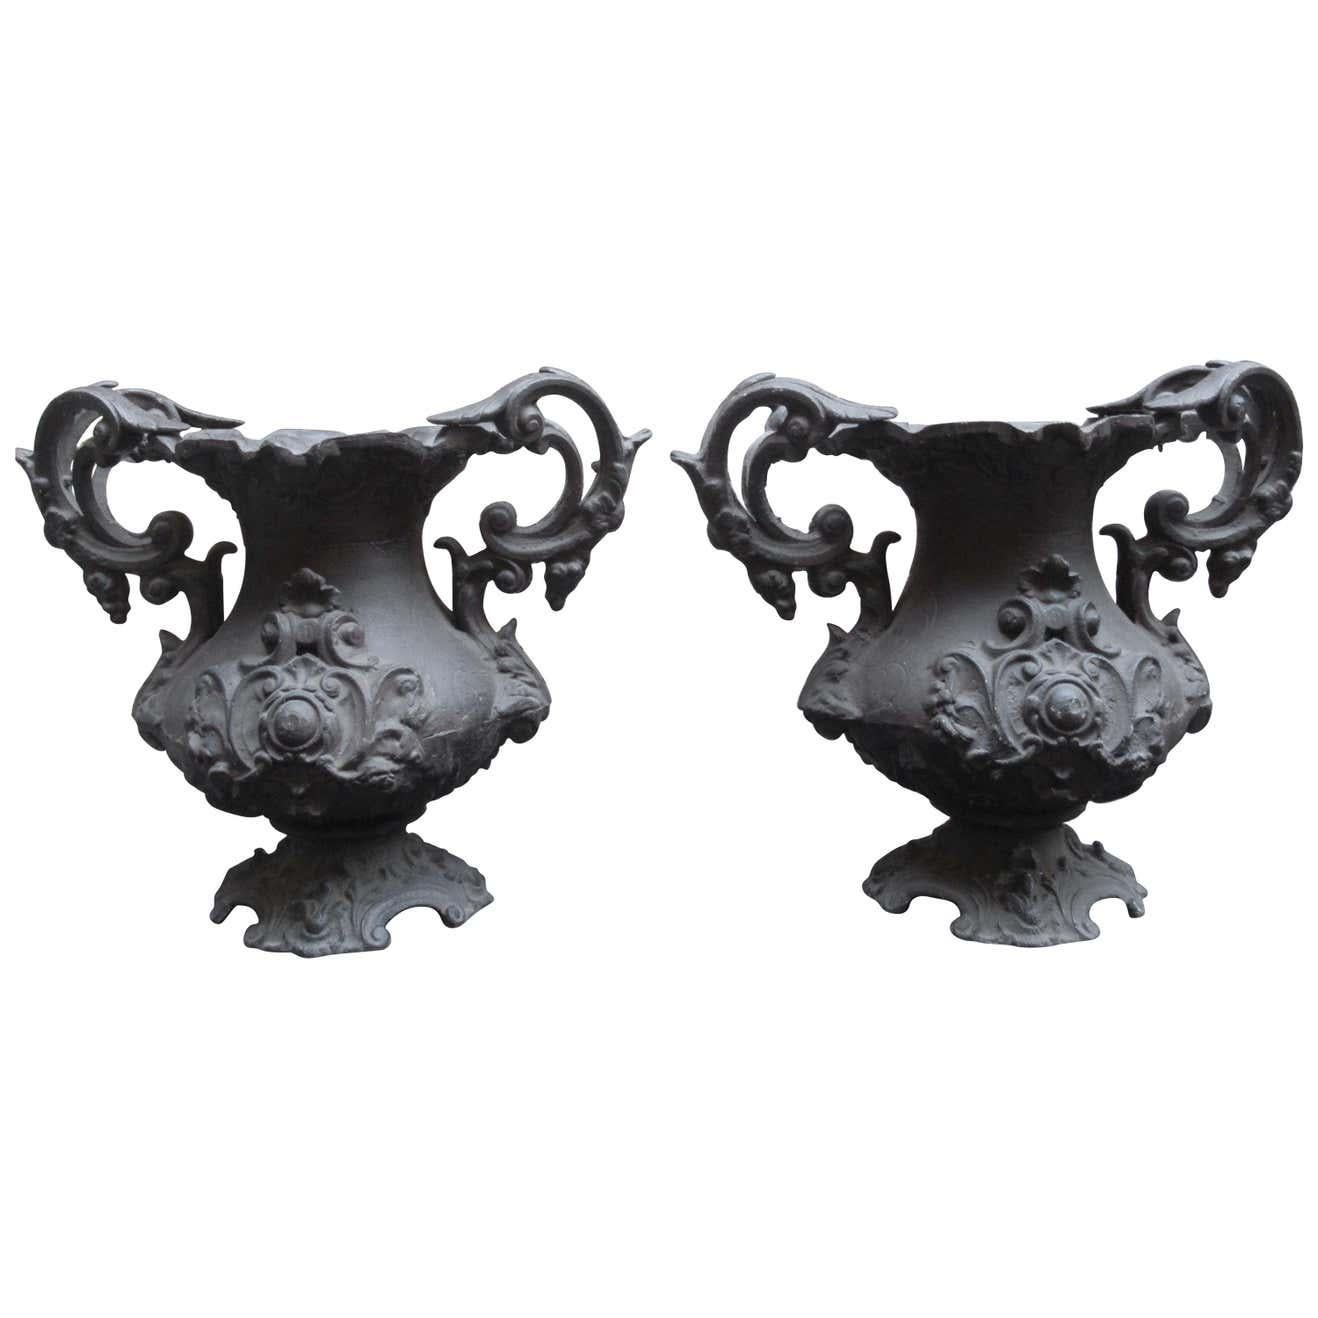 Pair of early 20th century cast iron urns with decorative foliate work and scroll handles. Beautiful shape and detail with a good patina for the age. Perfect for statement for your garden or entrance.